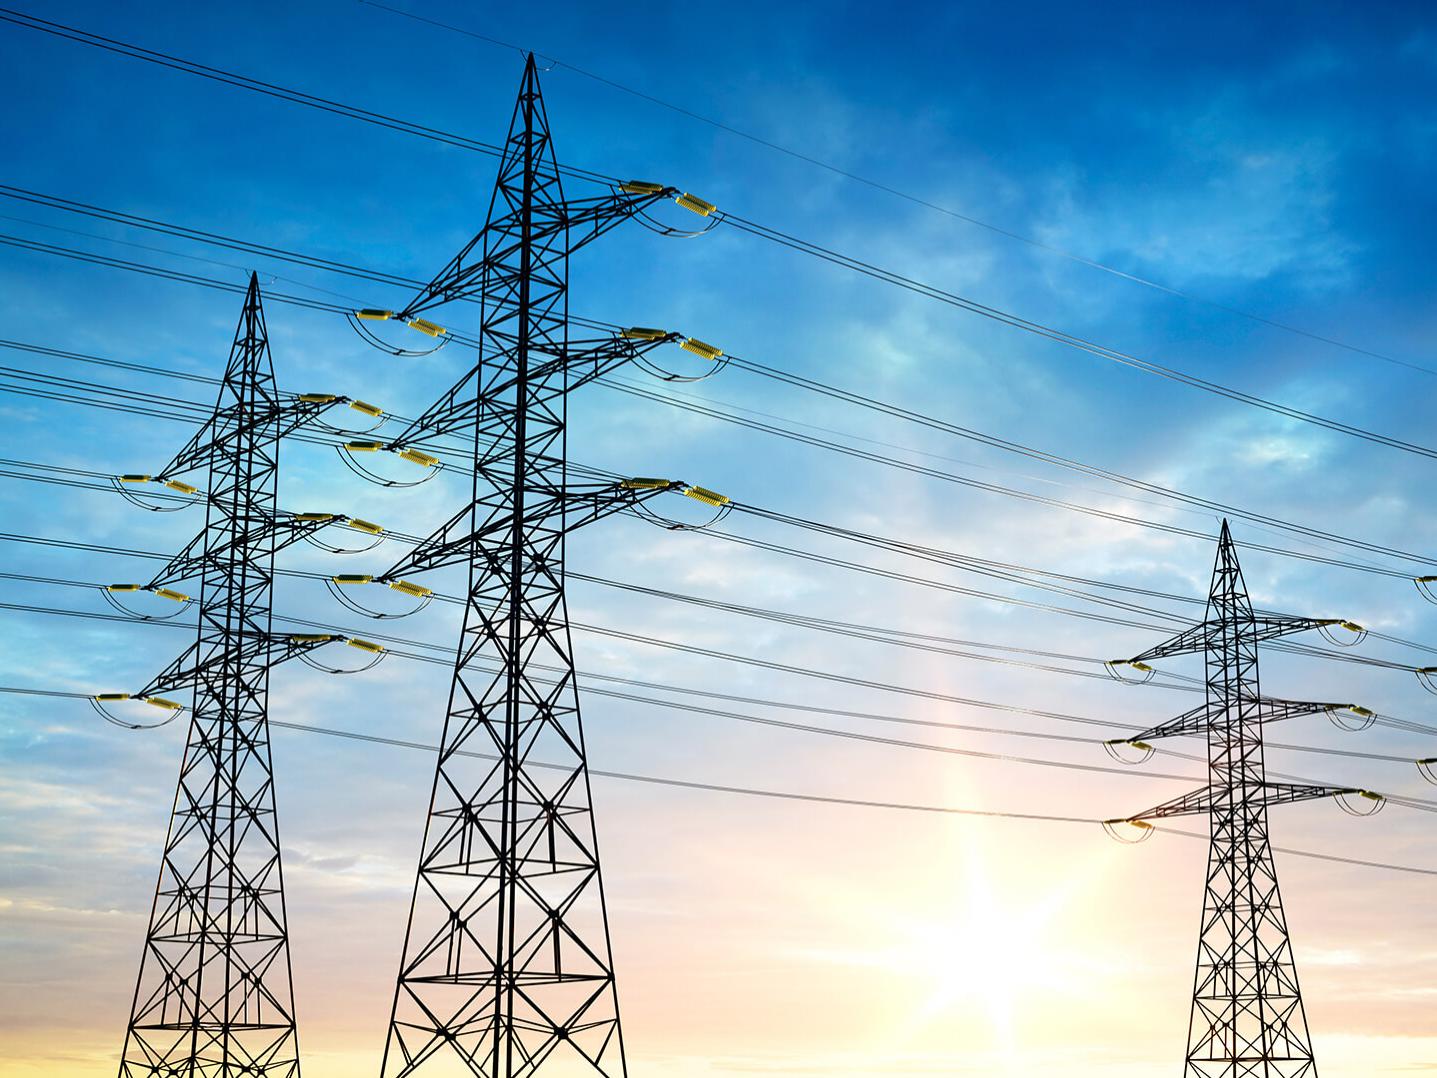 High voltage lines for the energy sector